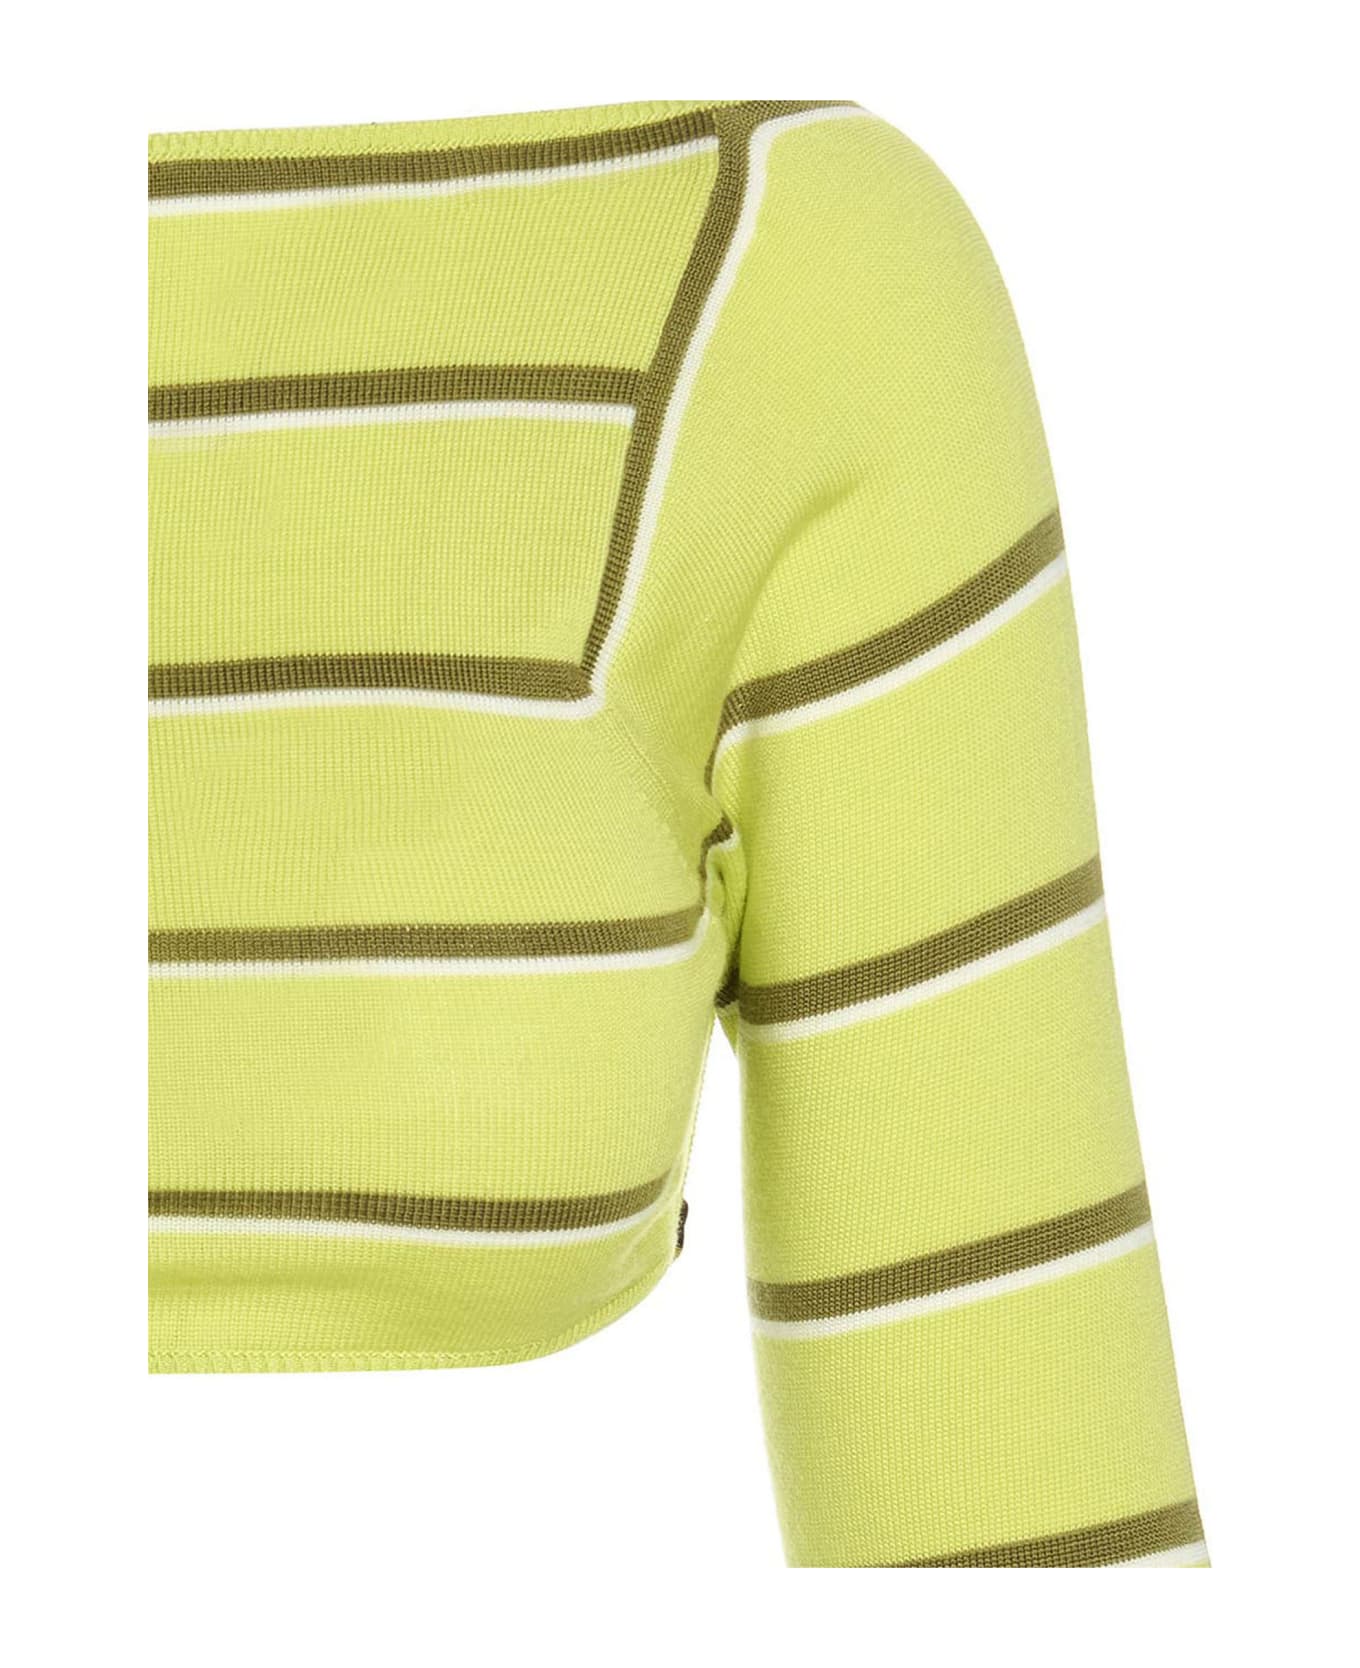 Pucci Cut-out Cropped Sweater - Green ニットウェア